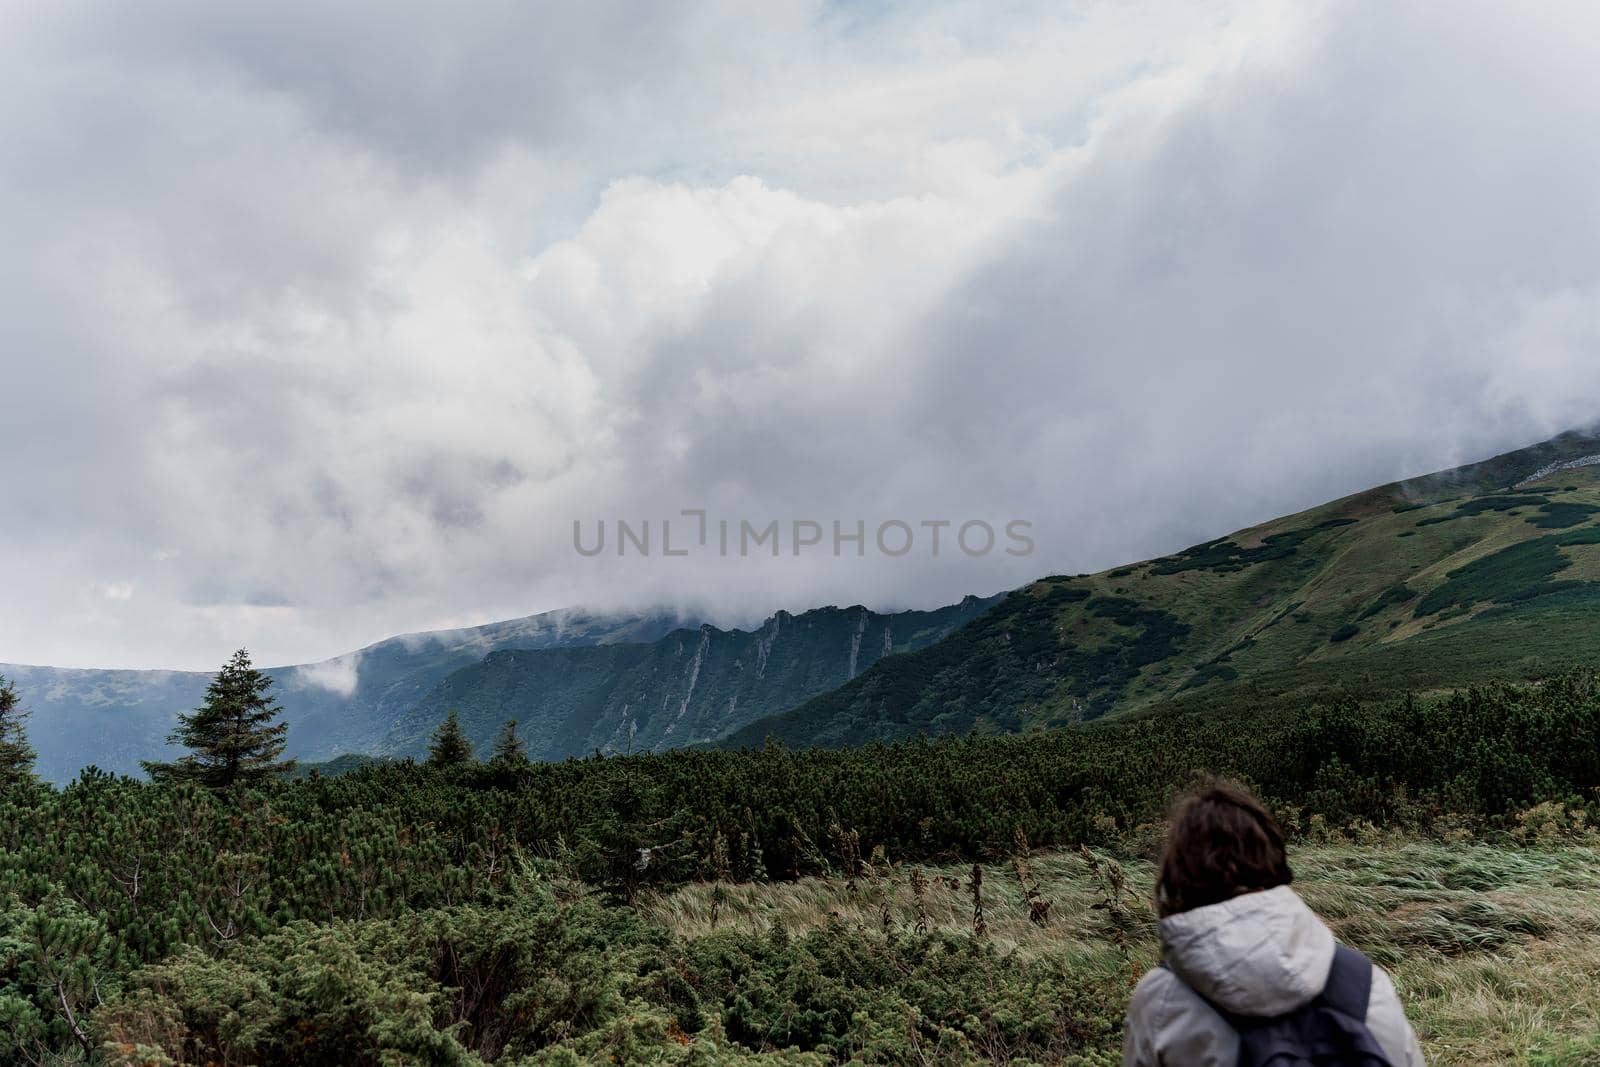 Girl is travelling in the mountains. Foggy day. Hiking and climbing up to the peak of the mountain. Beautiful nature of Ukraine.